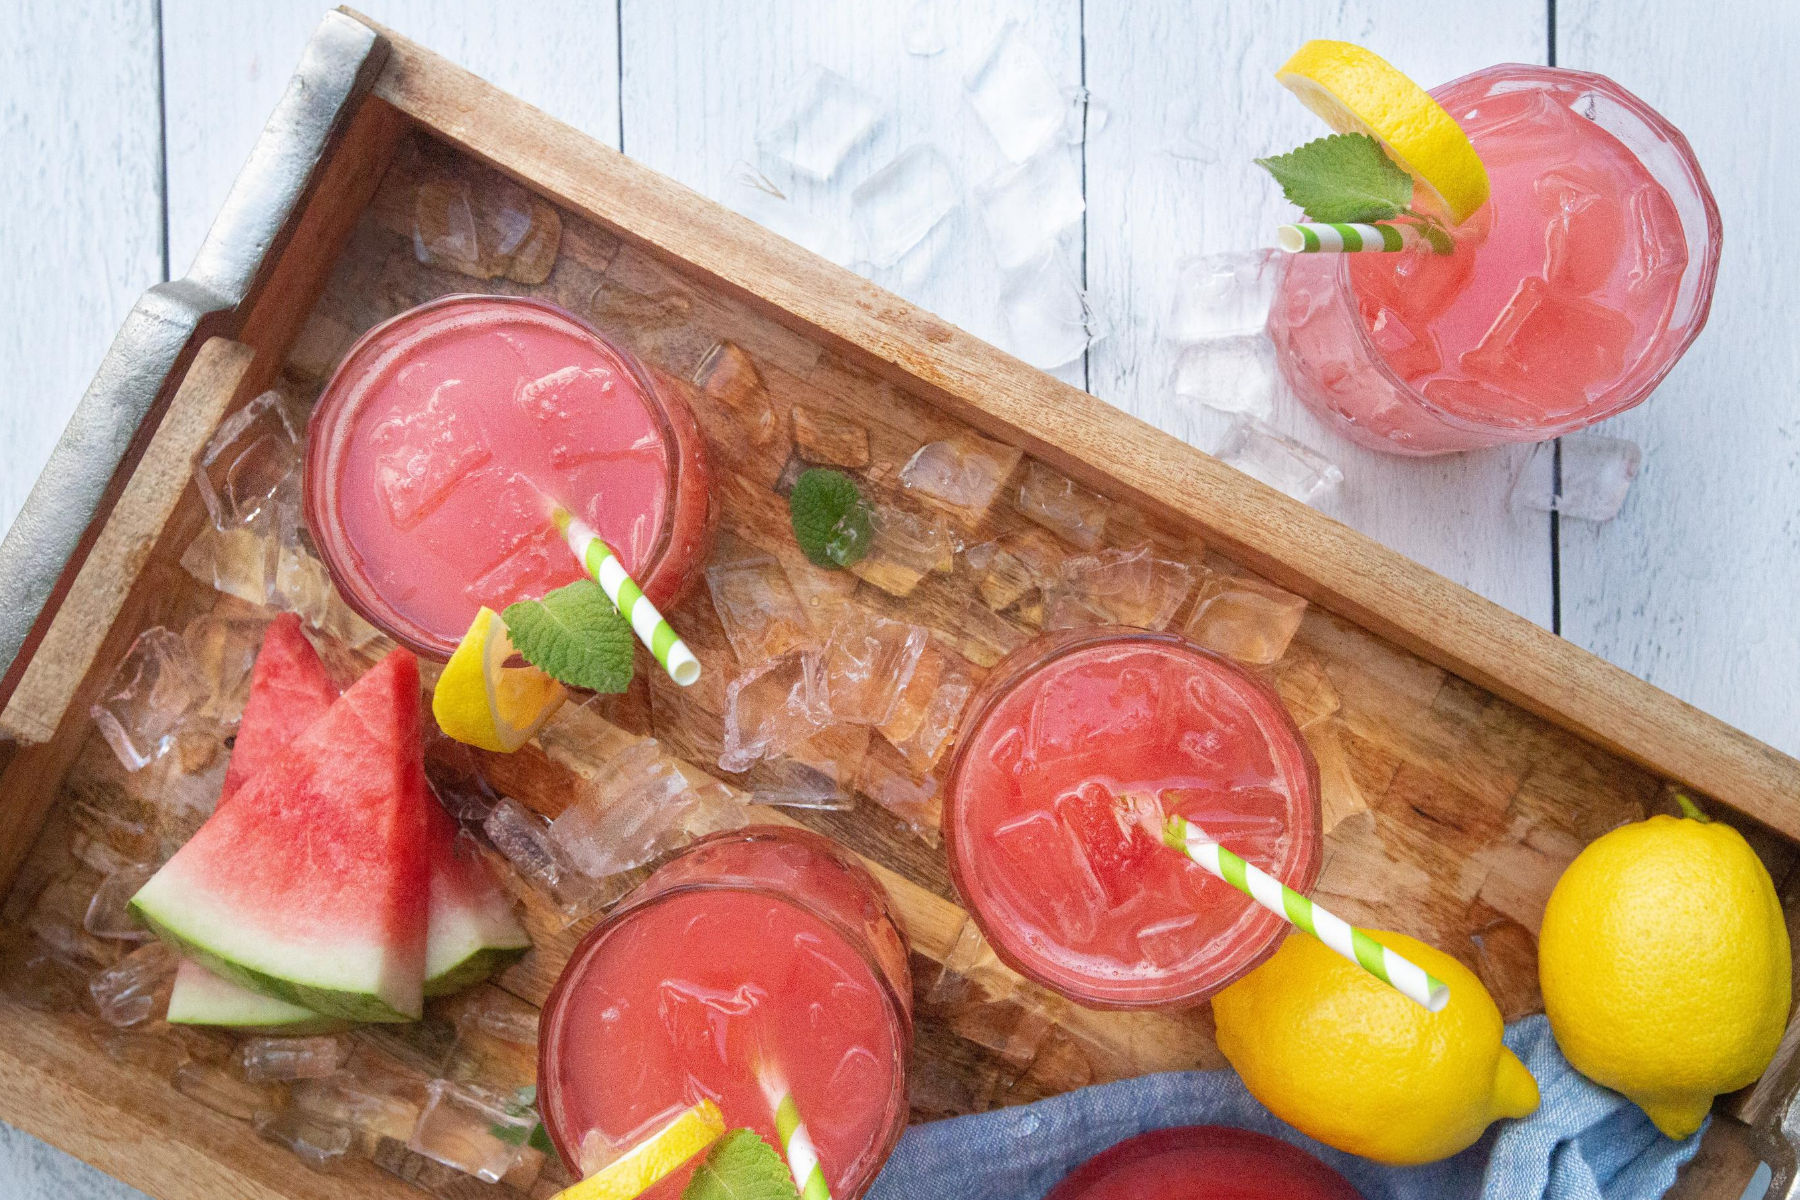 Glasses of watermelon lemonade, watermelon slices and lemons on a wooden tray.